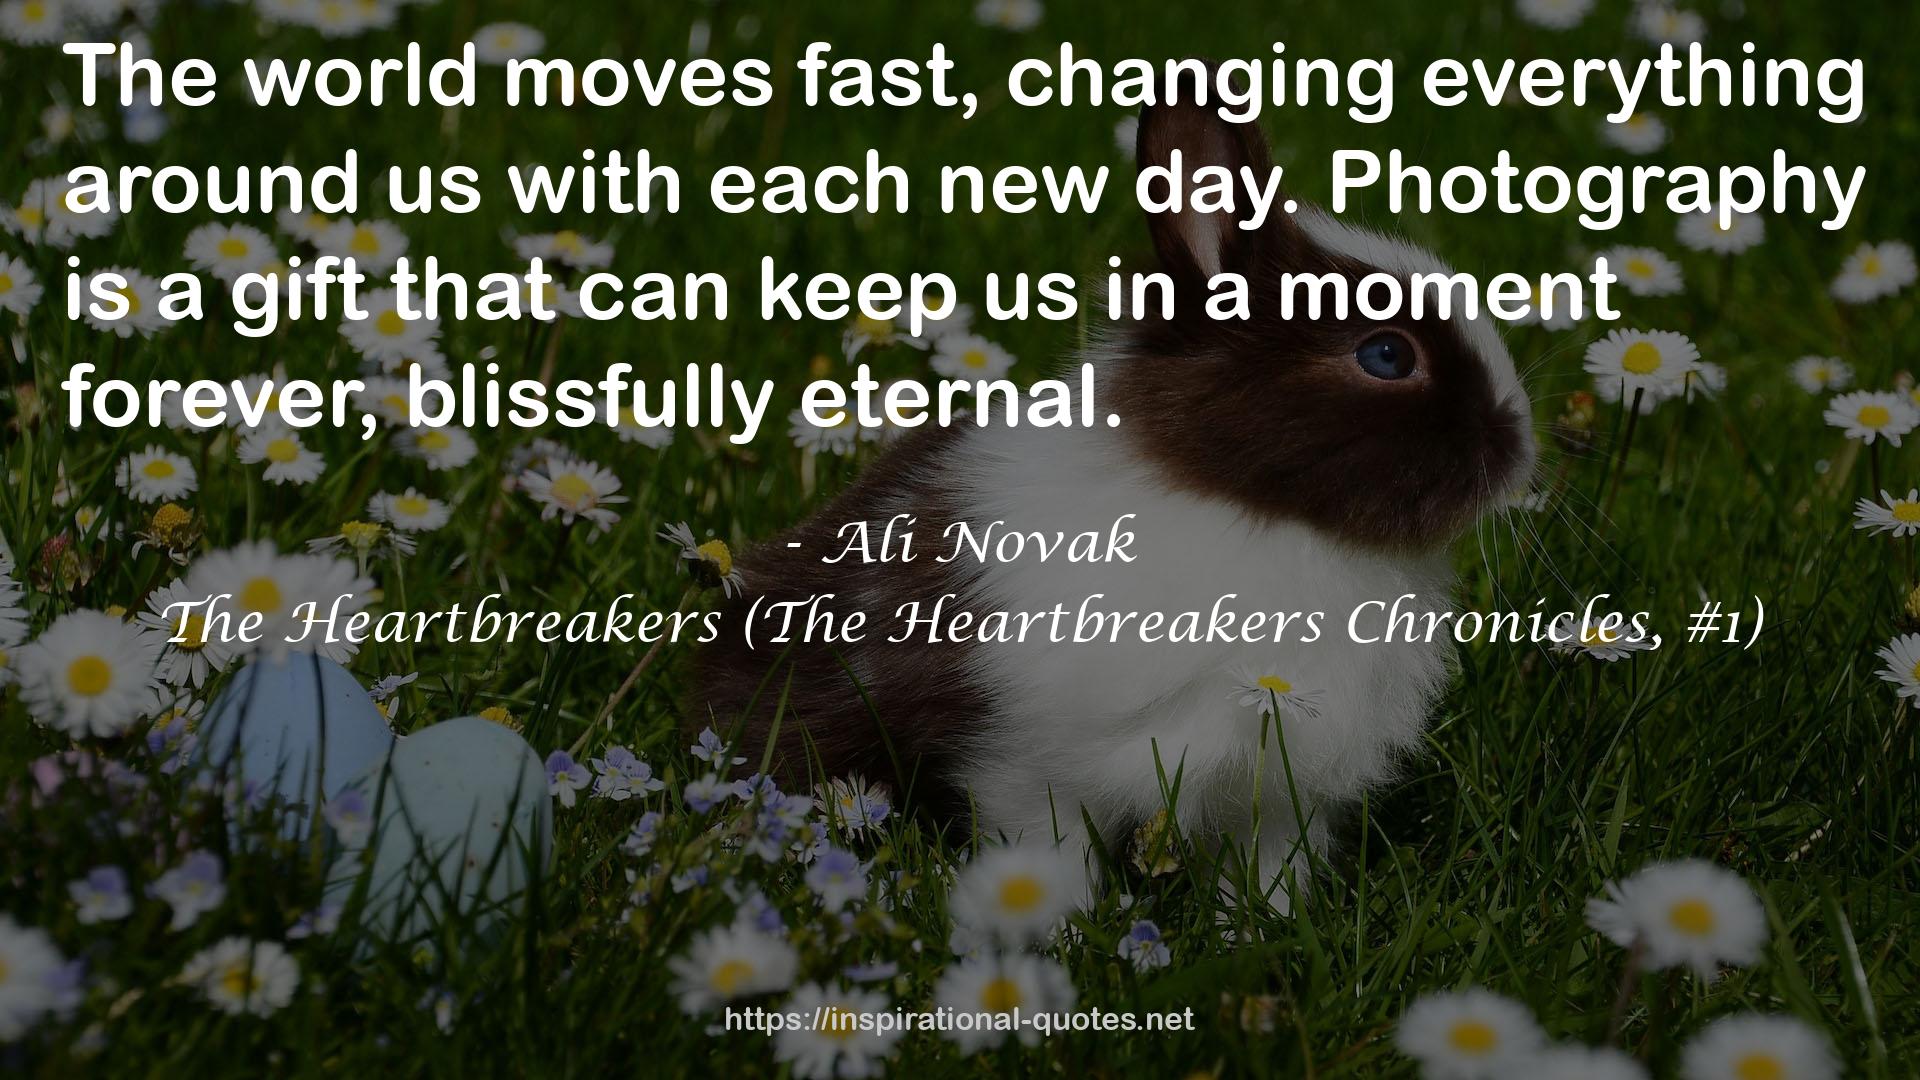 The Heartbreakers (The Heartbreakers Chronicles, #1) QUOTES